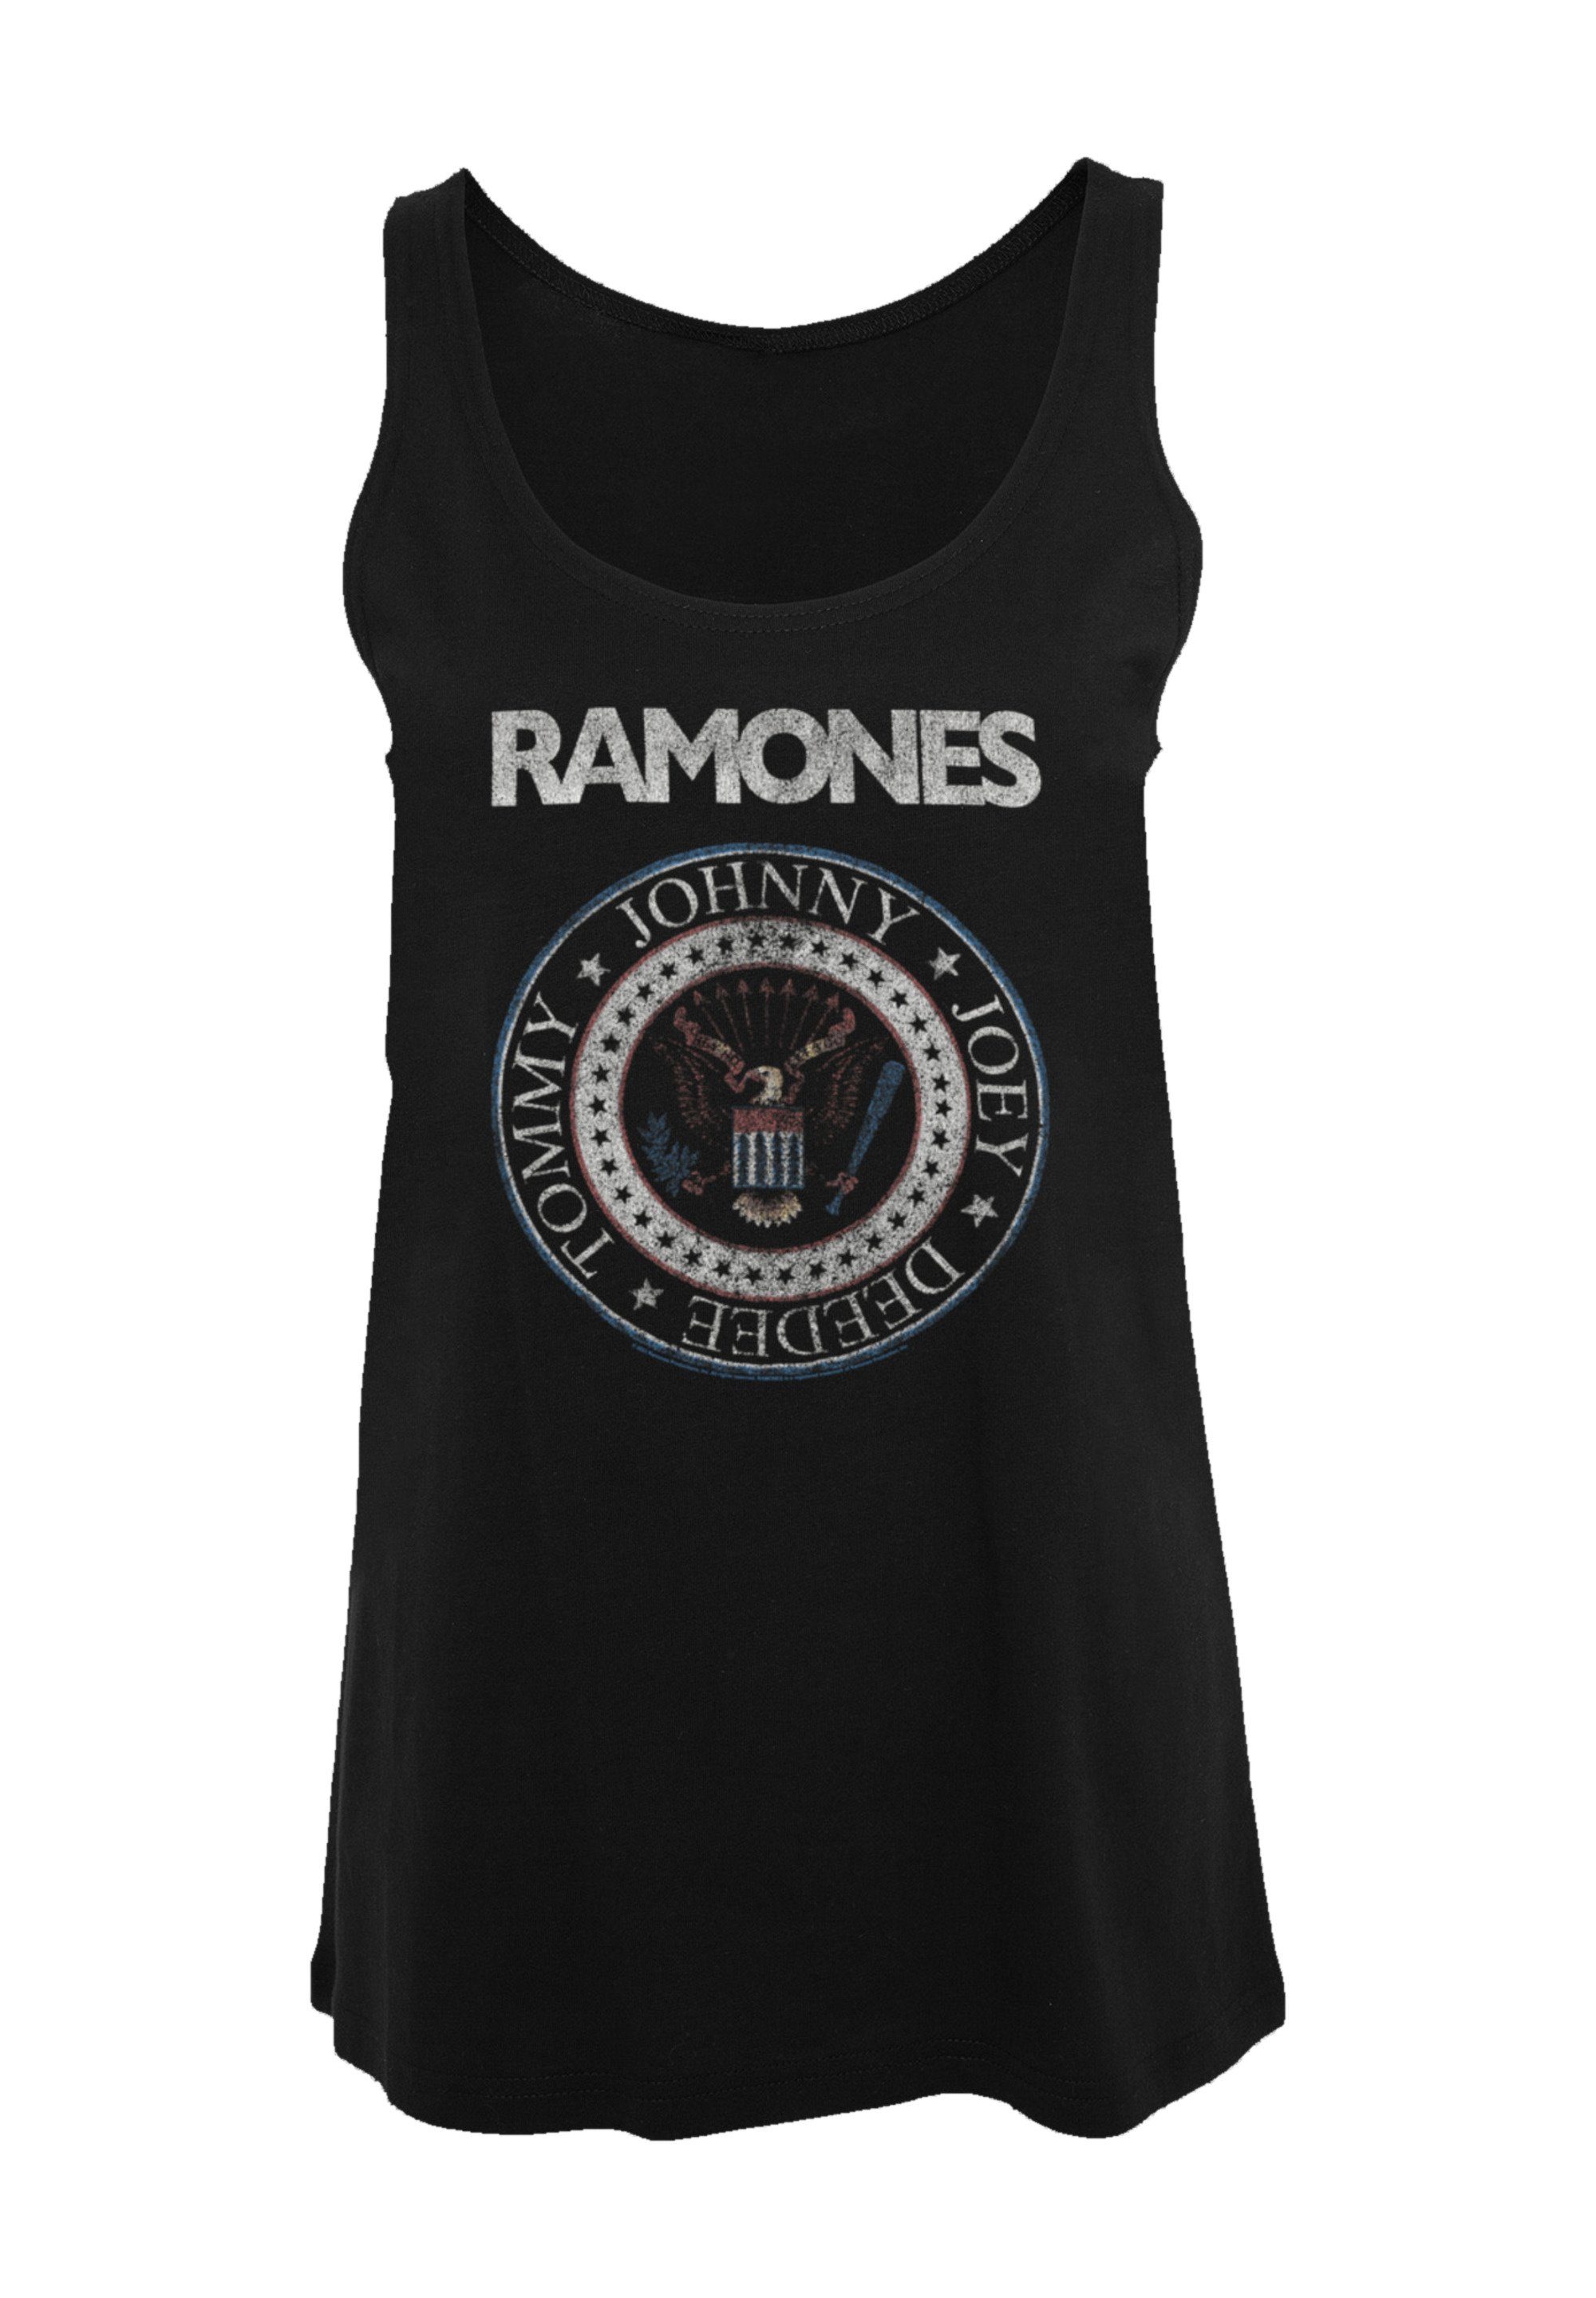 Seal Qualität, White Band Rock-Musik Musik T-Shirt Ramones Red Premium F4NT4STIC And Band, Rock